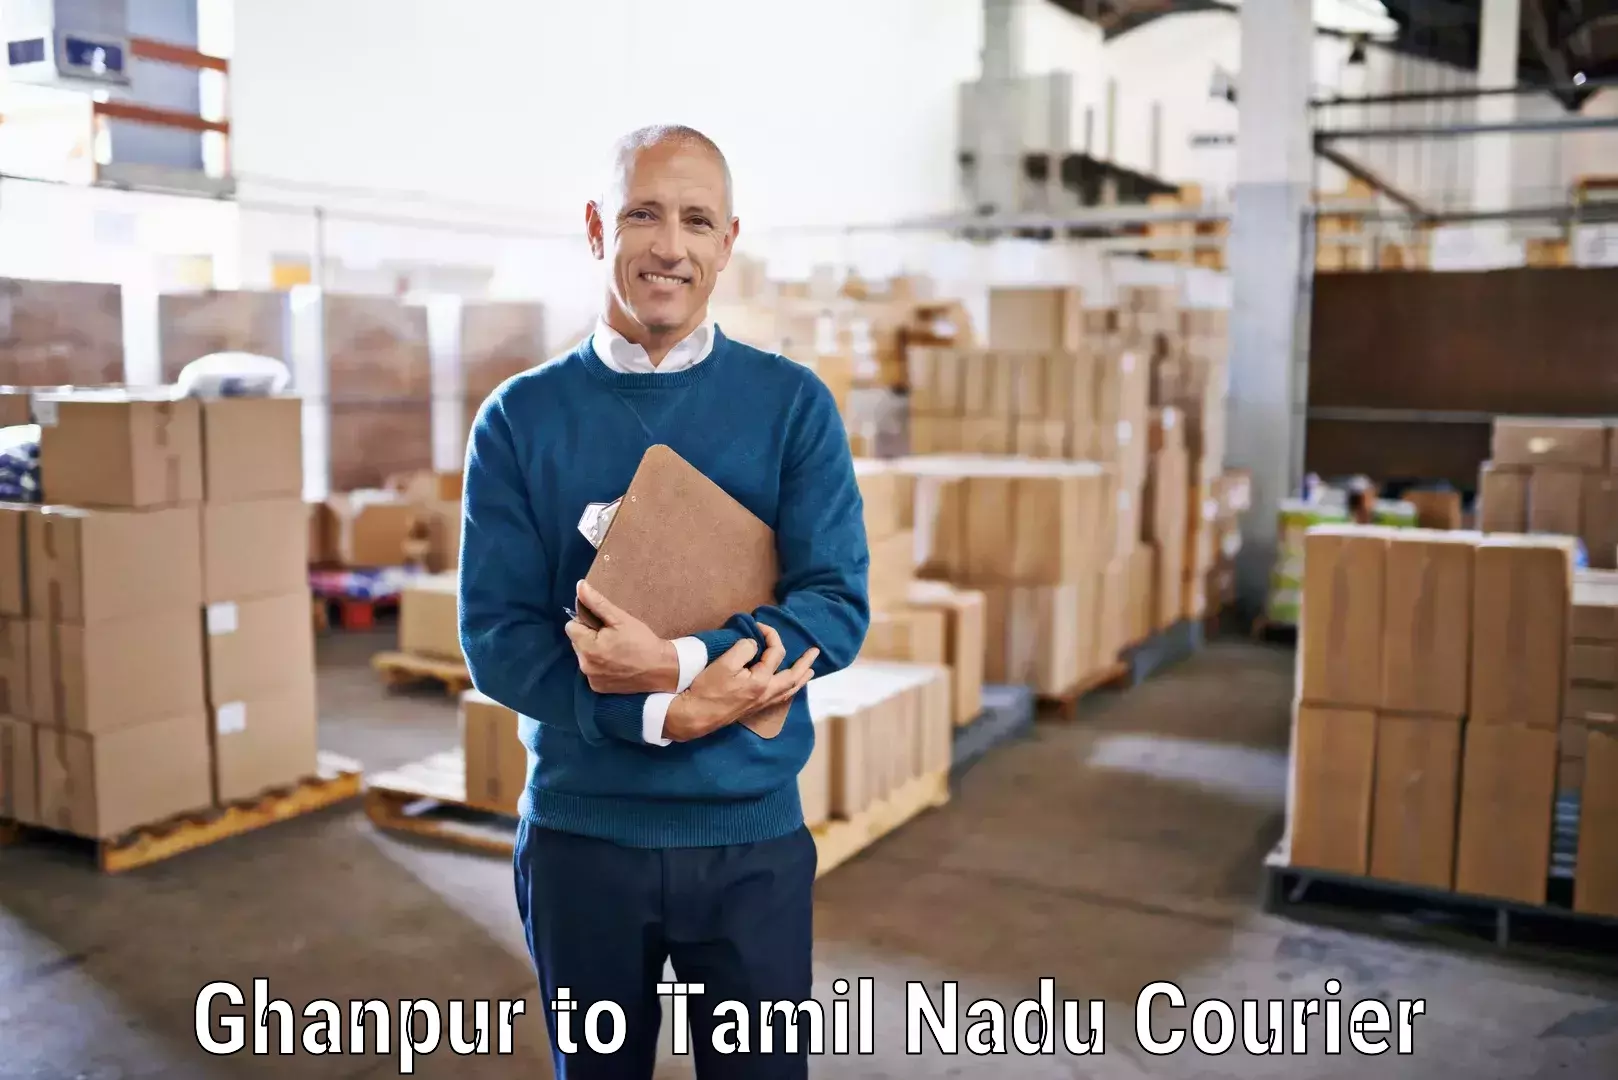 International courier networks Ghanpur to Avadi